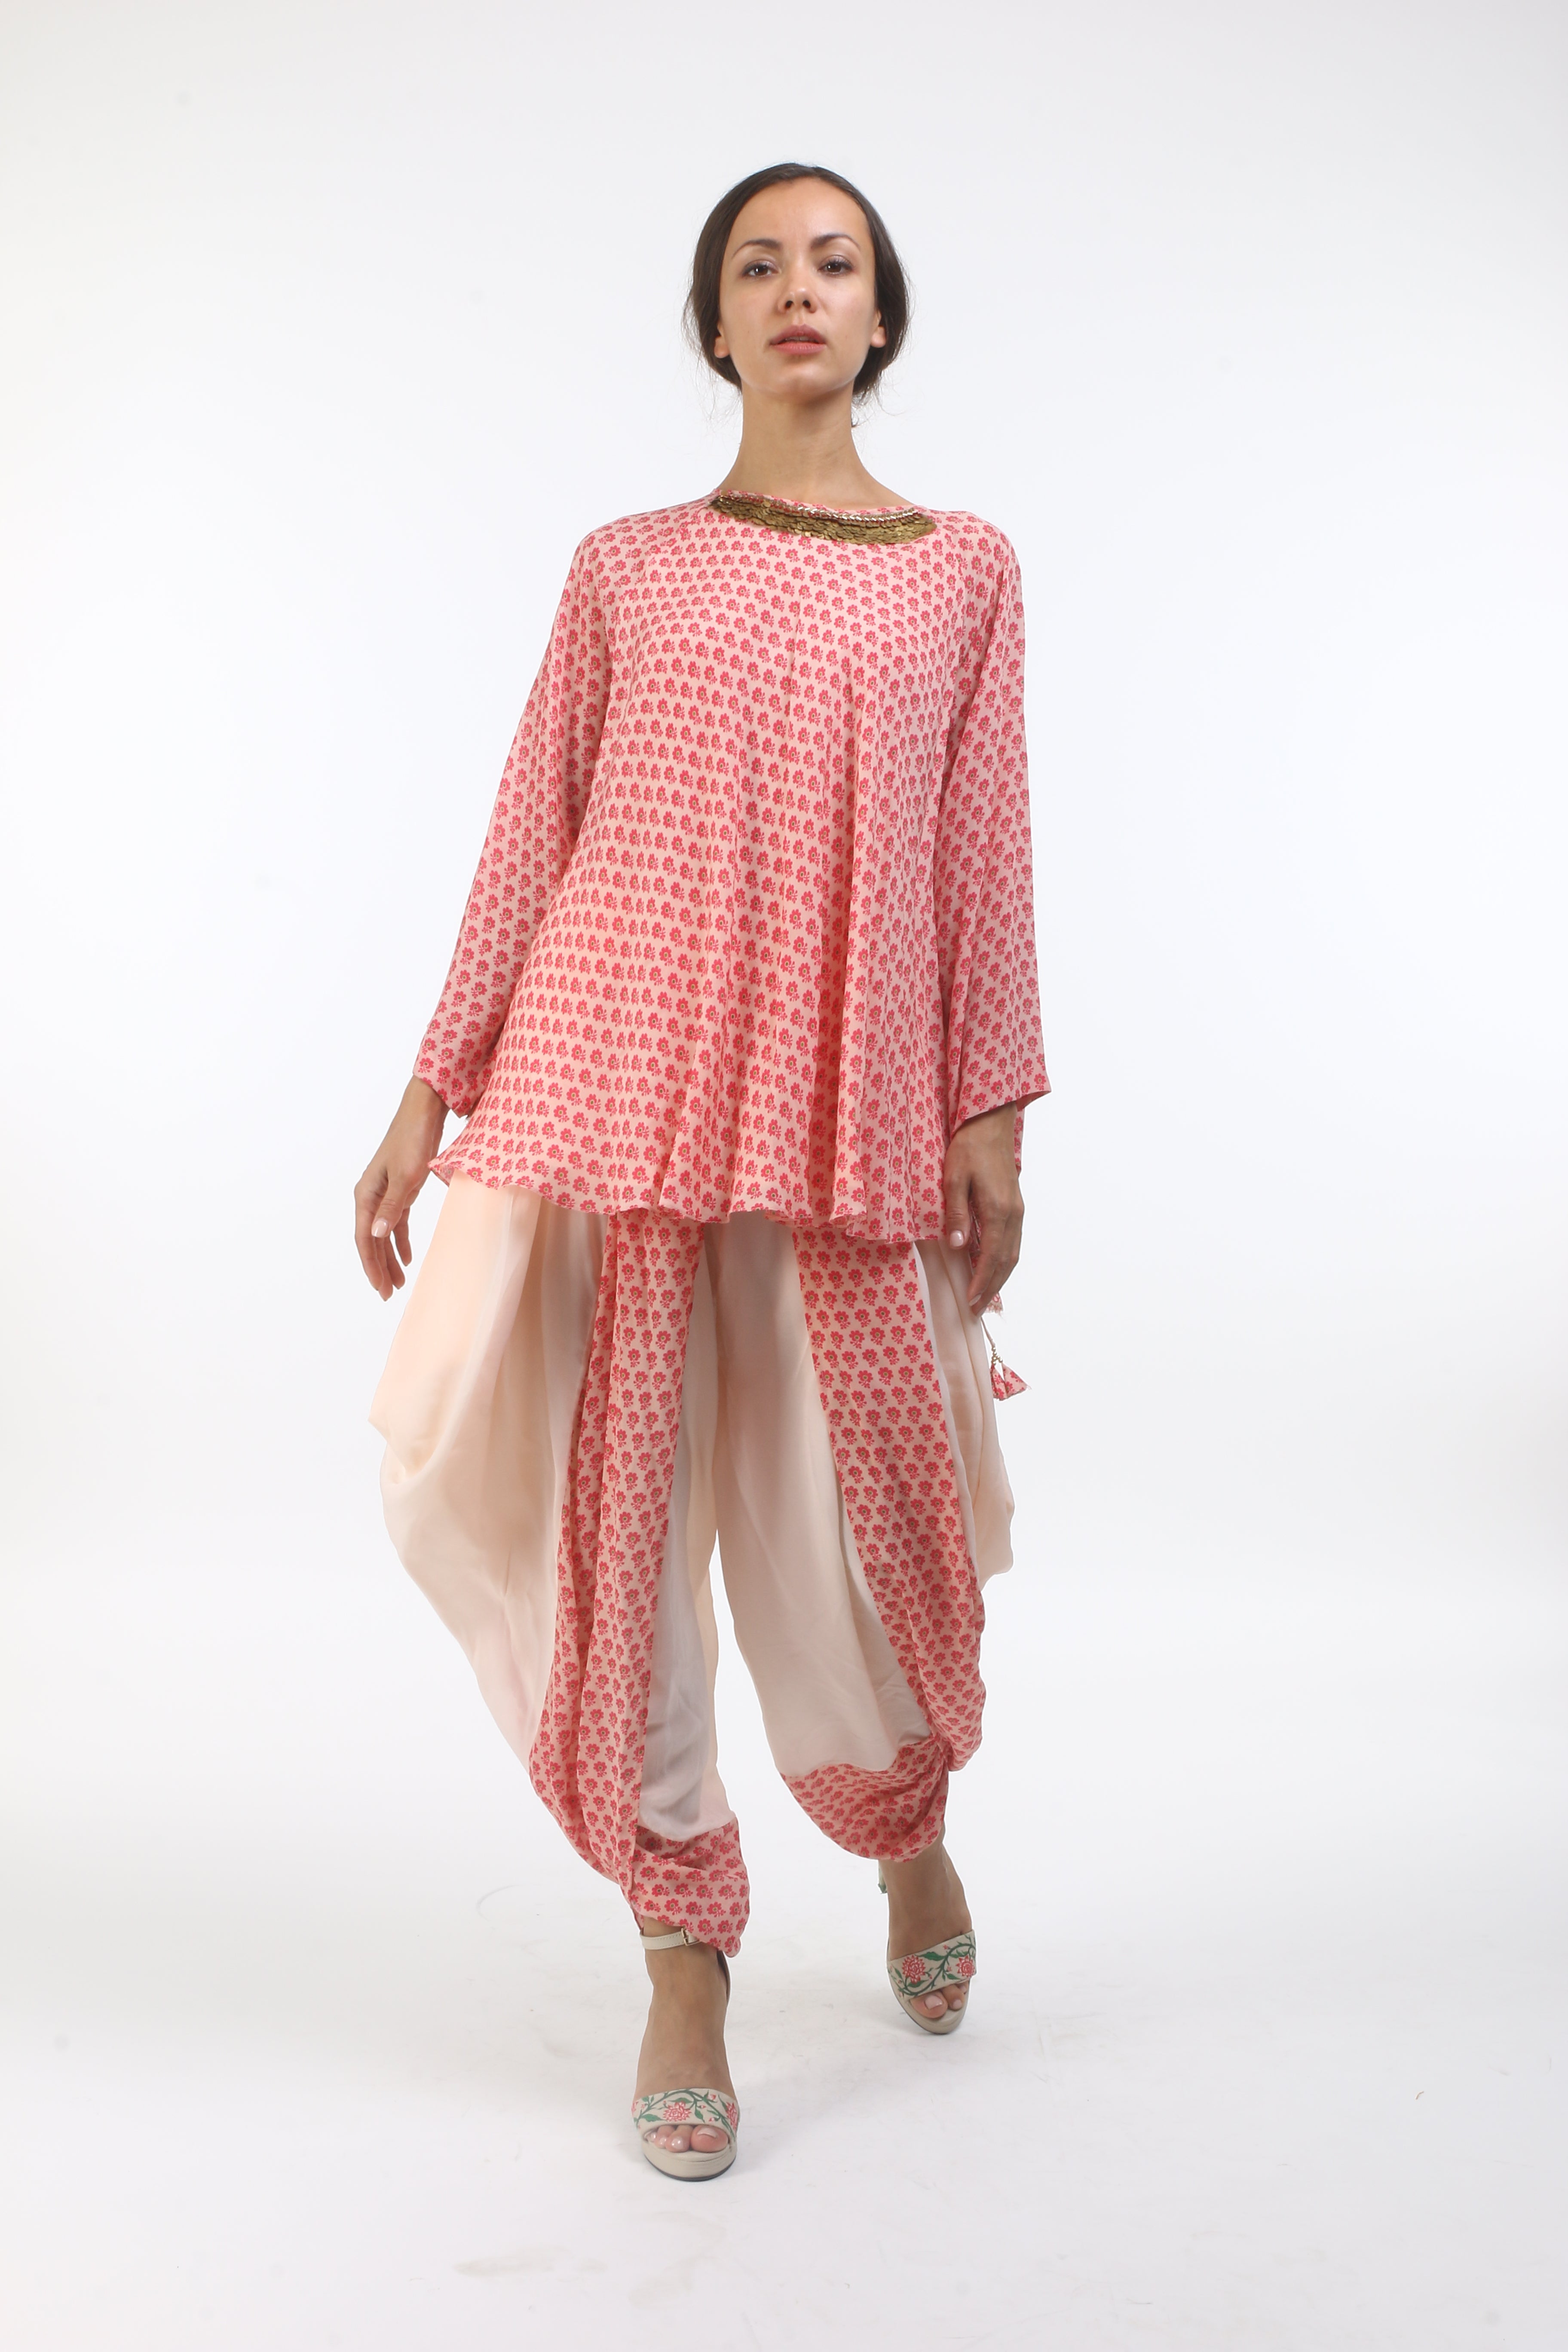 Bloom salmon pink poppy printed back open top with frill details,  & layered coin embroidered neckline, paired with a printed front panel dhoti.